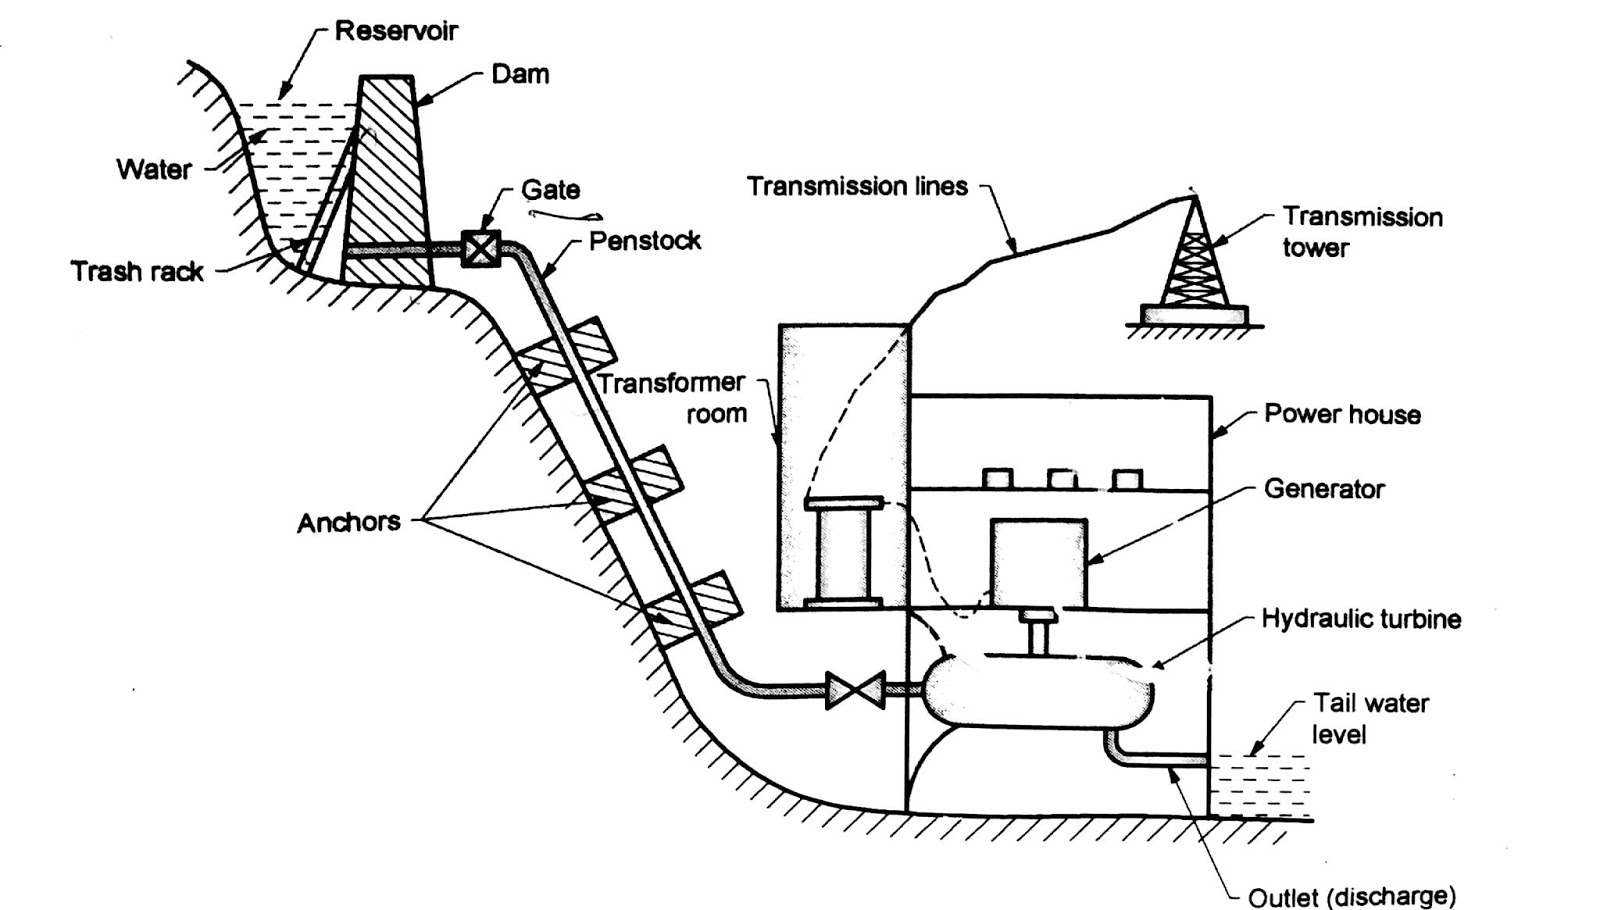 Schematic Layout of Hydro Electric Power Plant